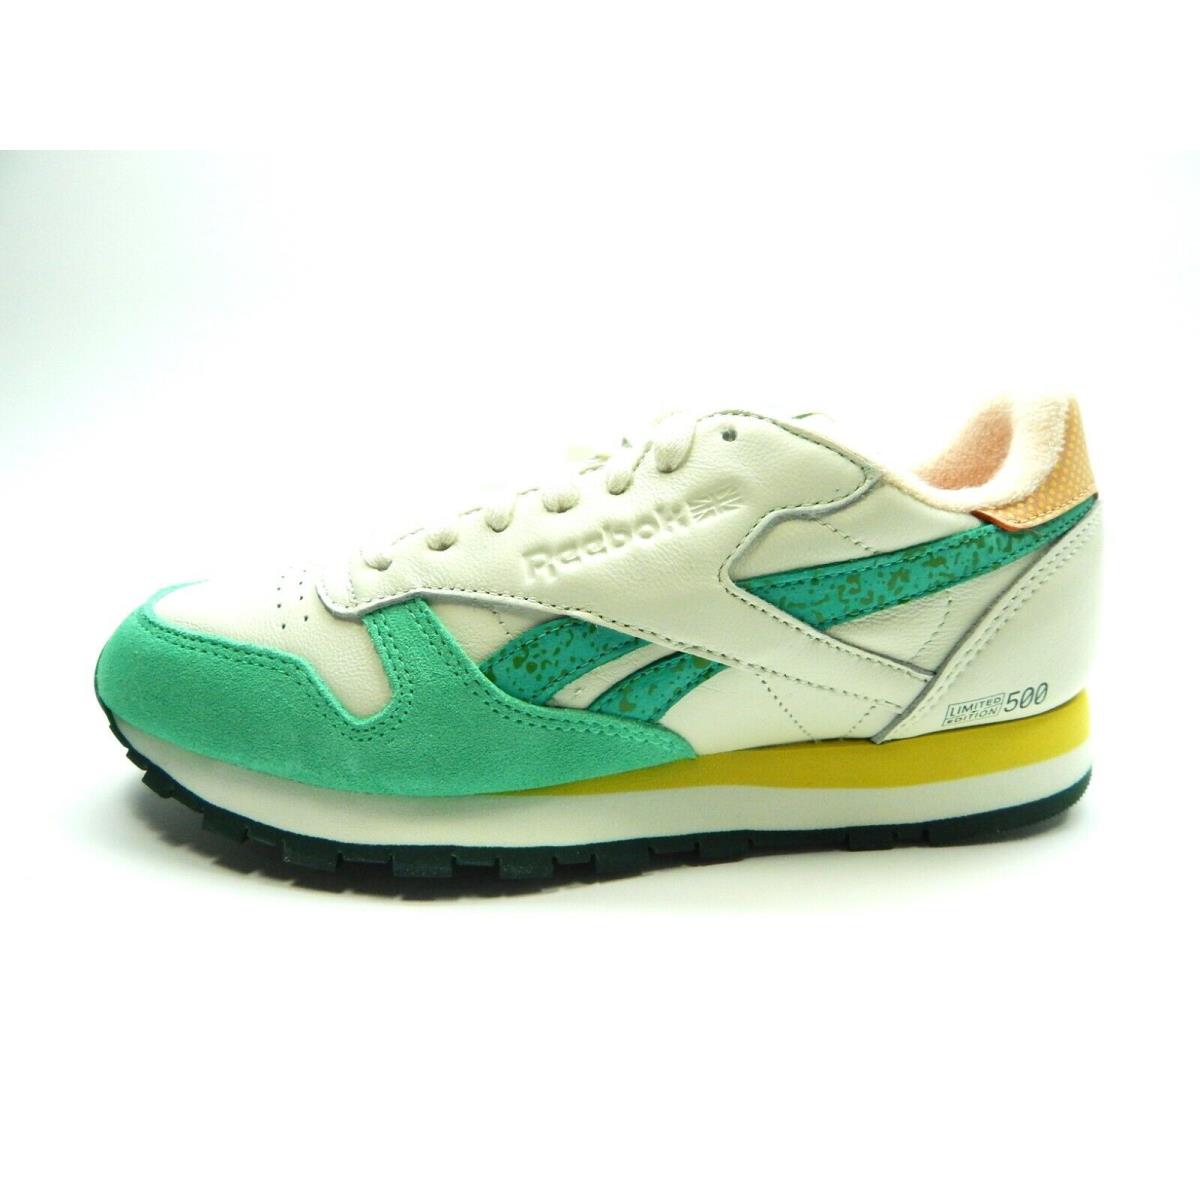 Marty Fielding Exactamente Solenoide Reebok CL Leather FP Running FZ3063 Limited Edition 500 Men Shoes Size 6.5  | 194811494223 - Reebok shoes - White | SporTipTop